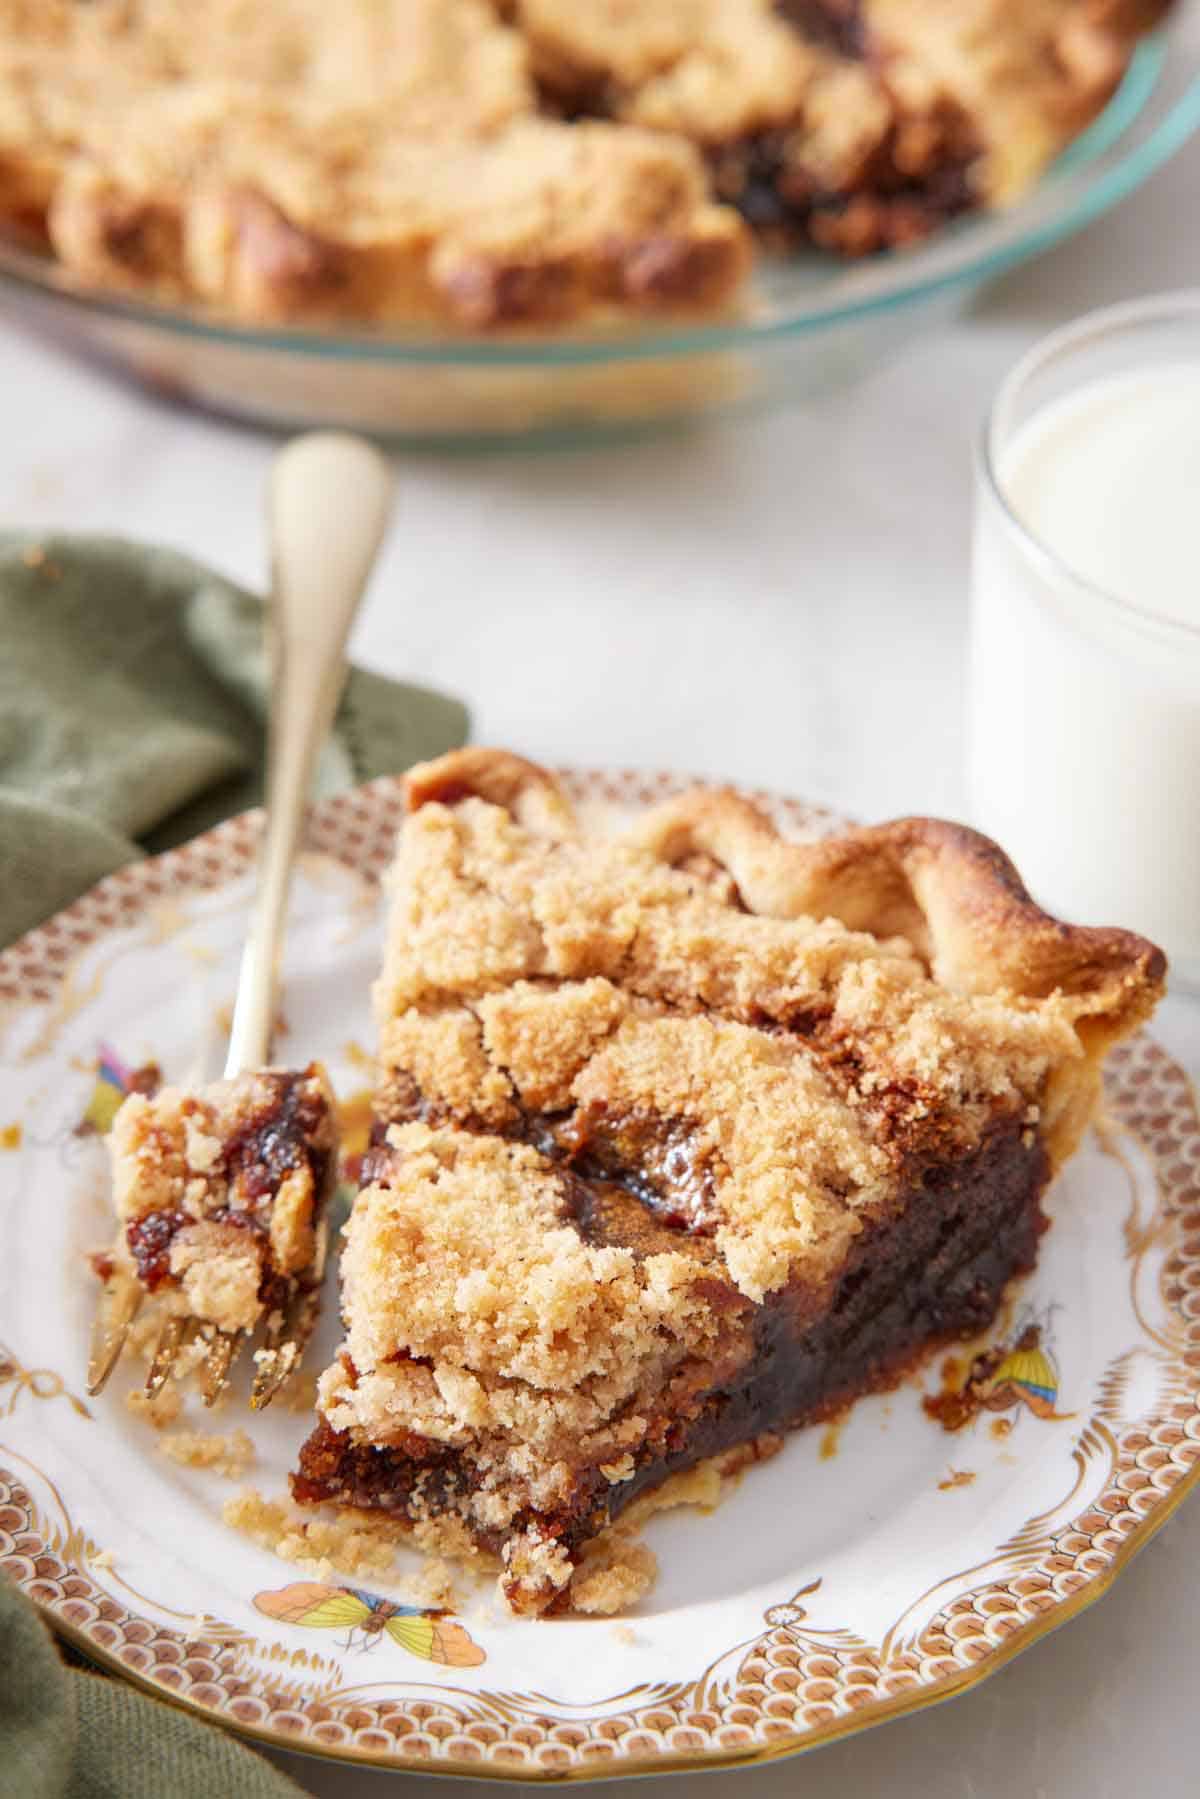 A plate with a slice of shoofly pie with the tip of the slice on the fork beside it. A glass of milk and the rest of the pie behind it.